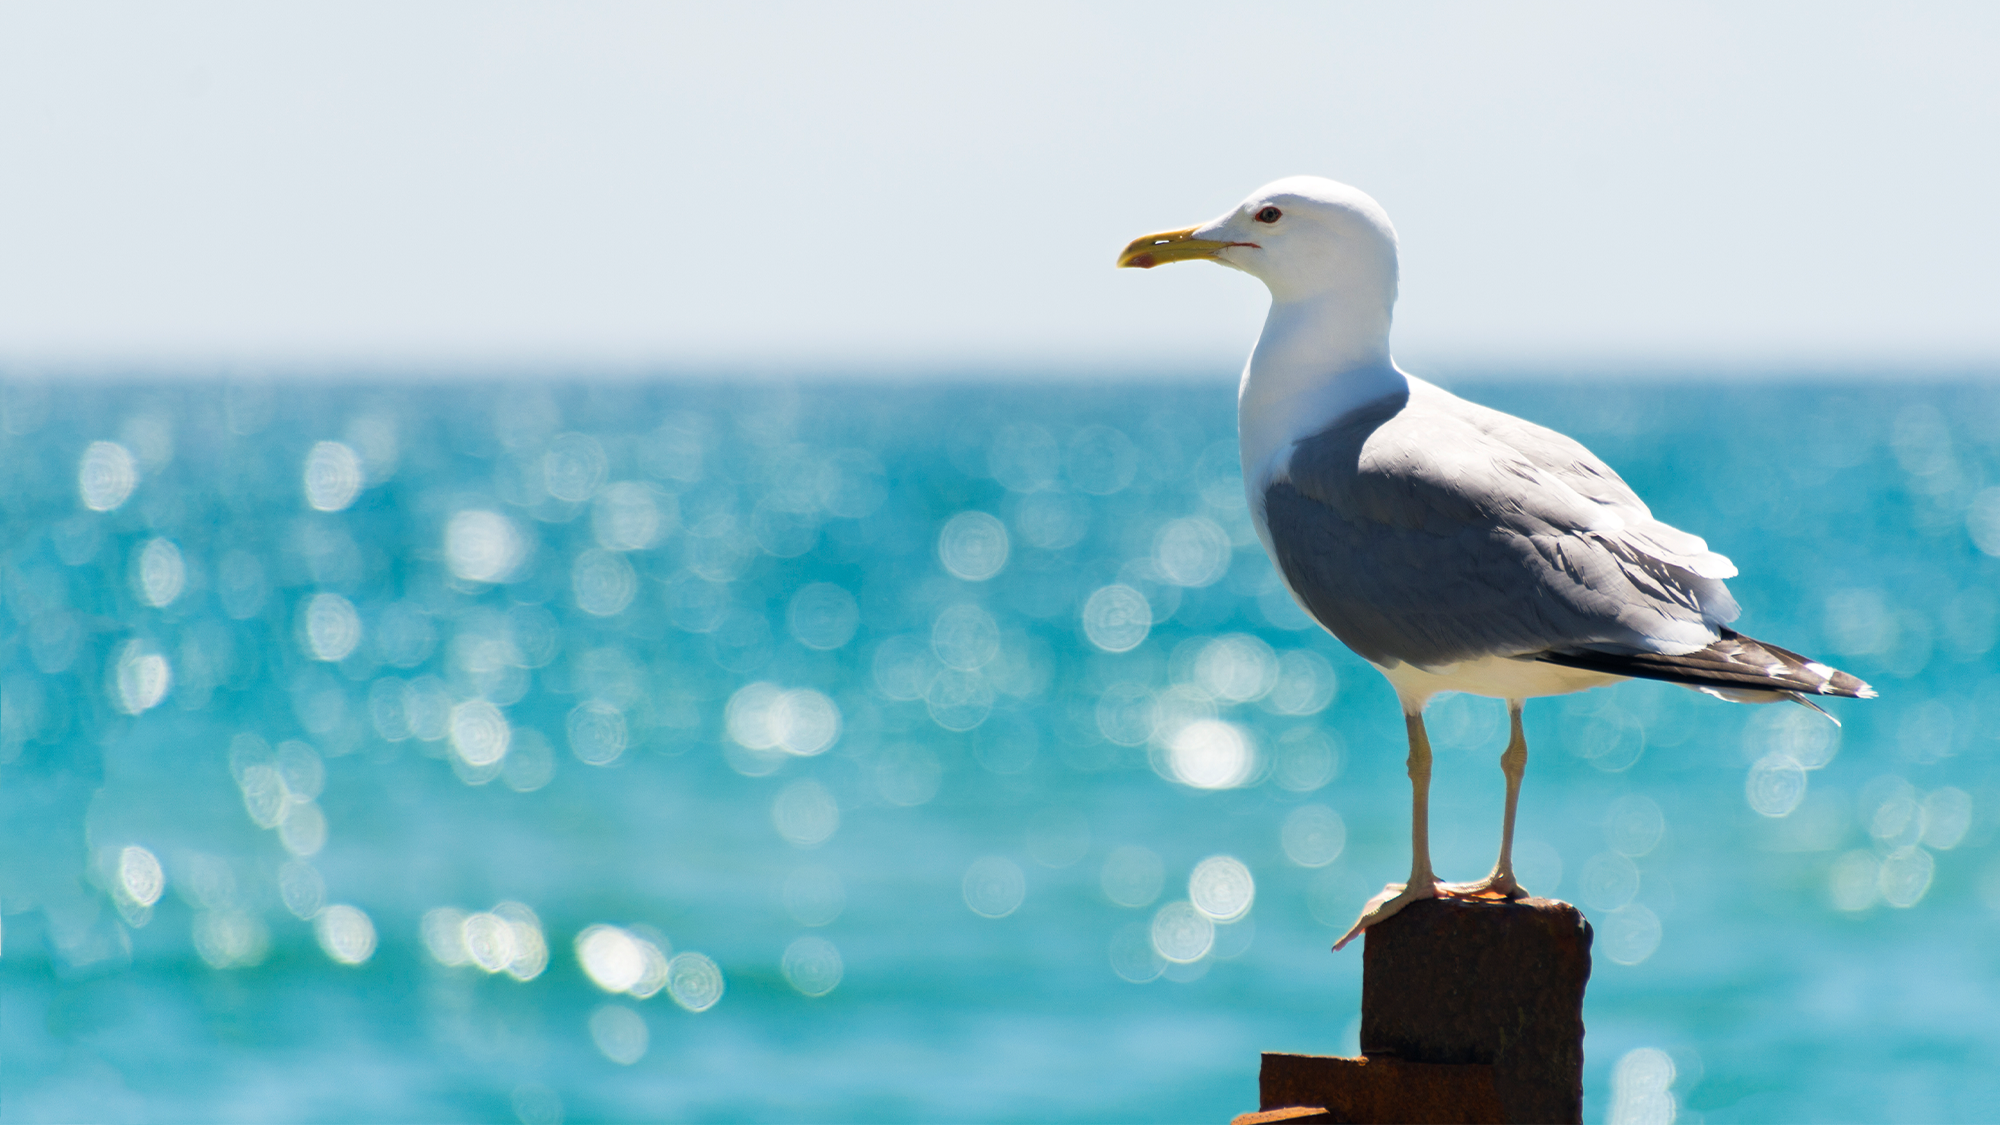 a seagull stands on a post by a large and sparkling body of blue water